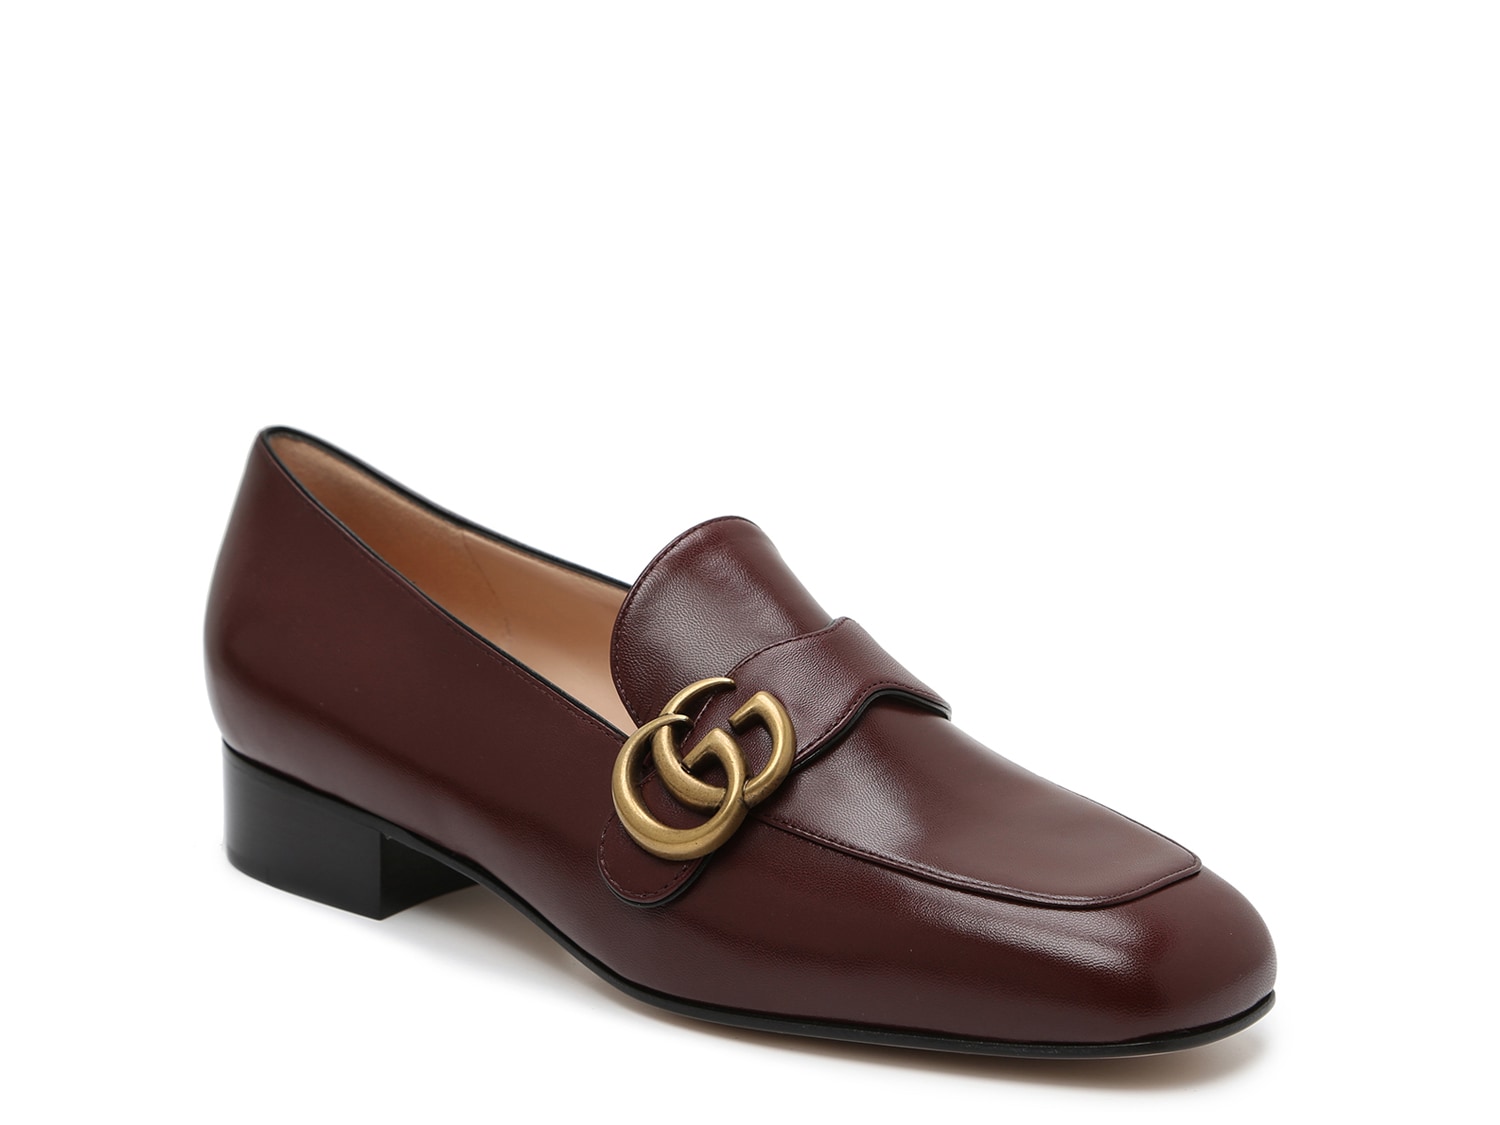 Gucci Marmont 25 Loafer - Free Shipping | DSW